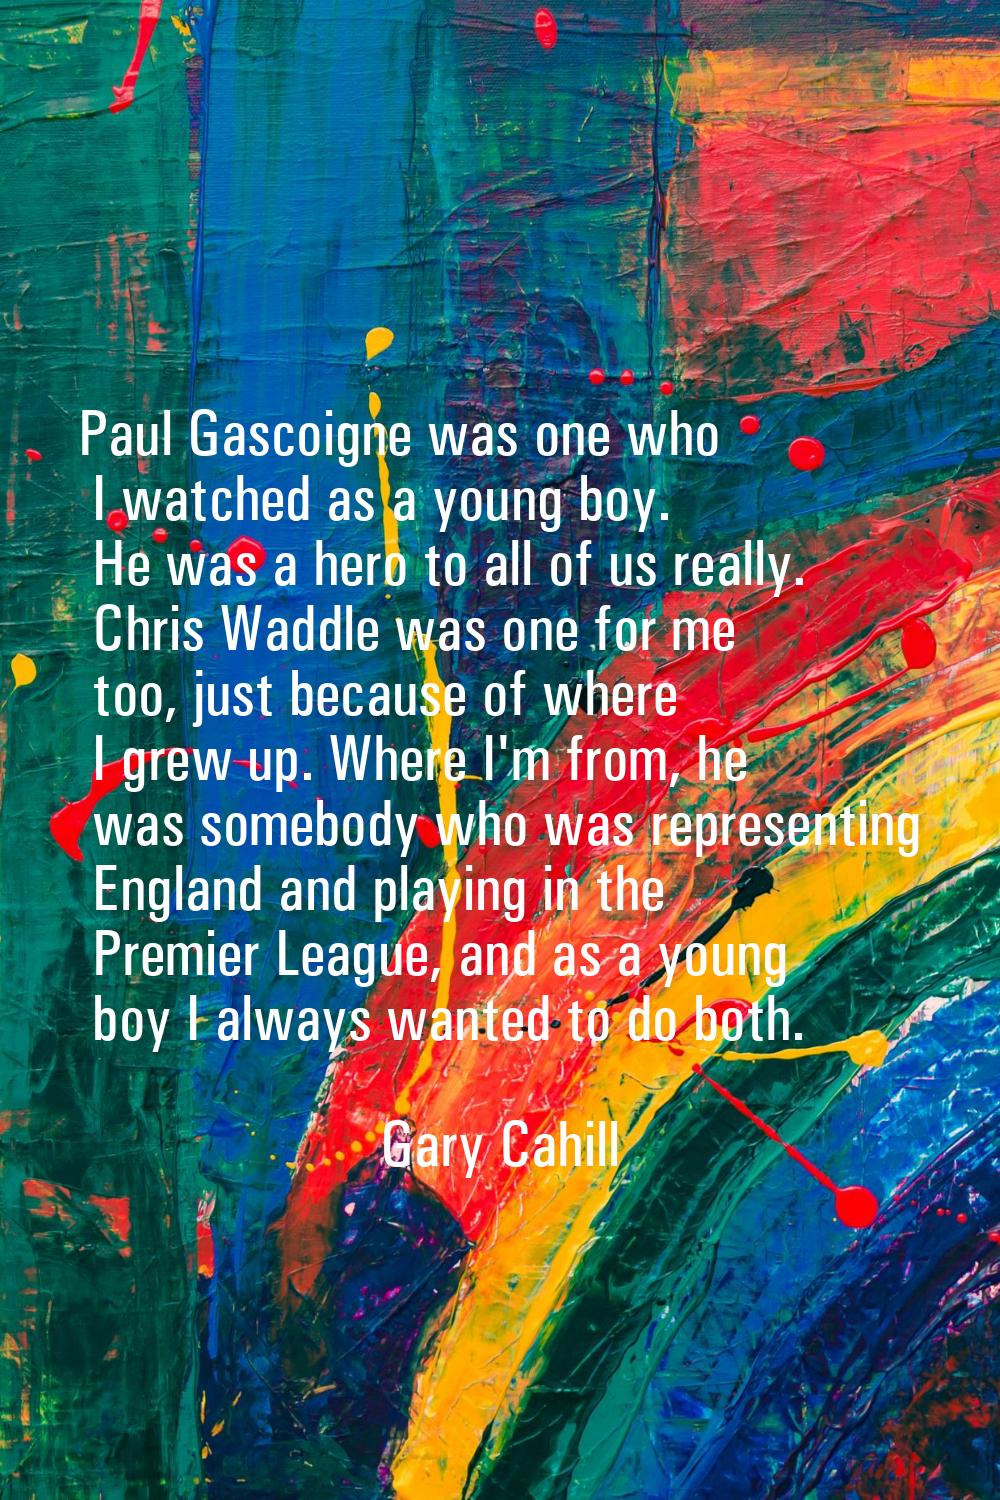 Paul Gascoigne was one who I watched as a young boy. He was a hero to all of us really. Chris Waddl